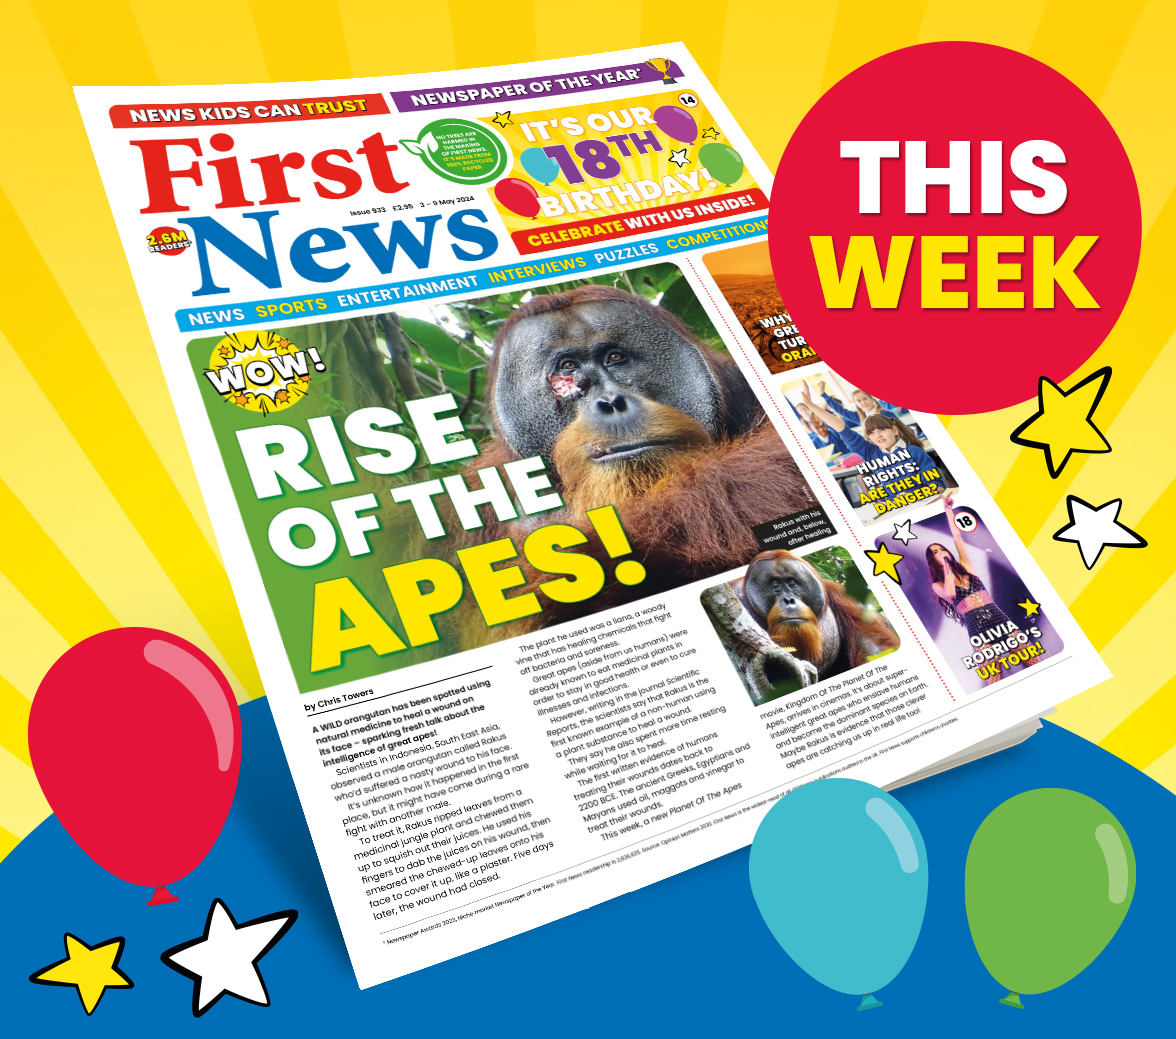 The latest edition of First News, the leading news source for kids, is OUT NOW! 🗞️ This week includes: 🦧 Orangutan uses plant to heal wound 🍰 Family eats 55-year-old cake 🏆 Woman sets new Guinness World Record for longest hair and so much more! Start reading today 📰